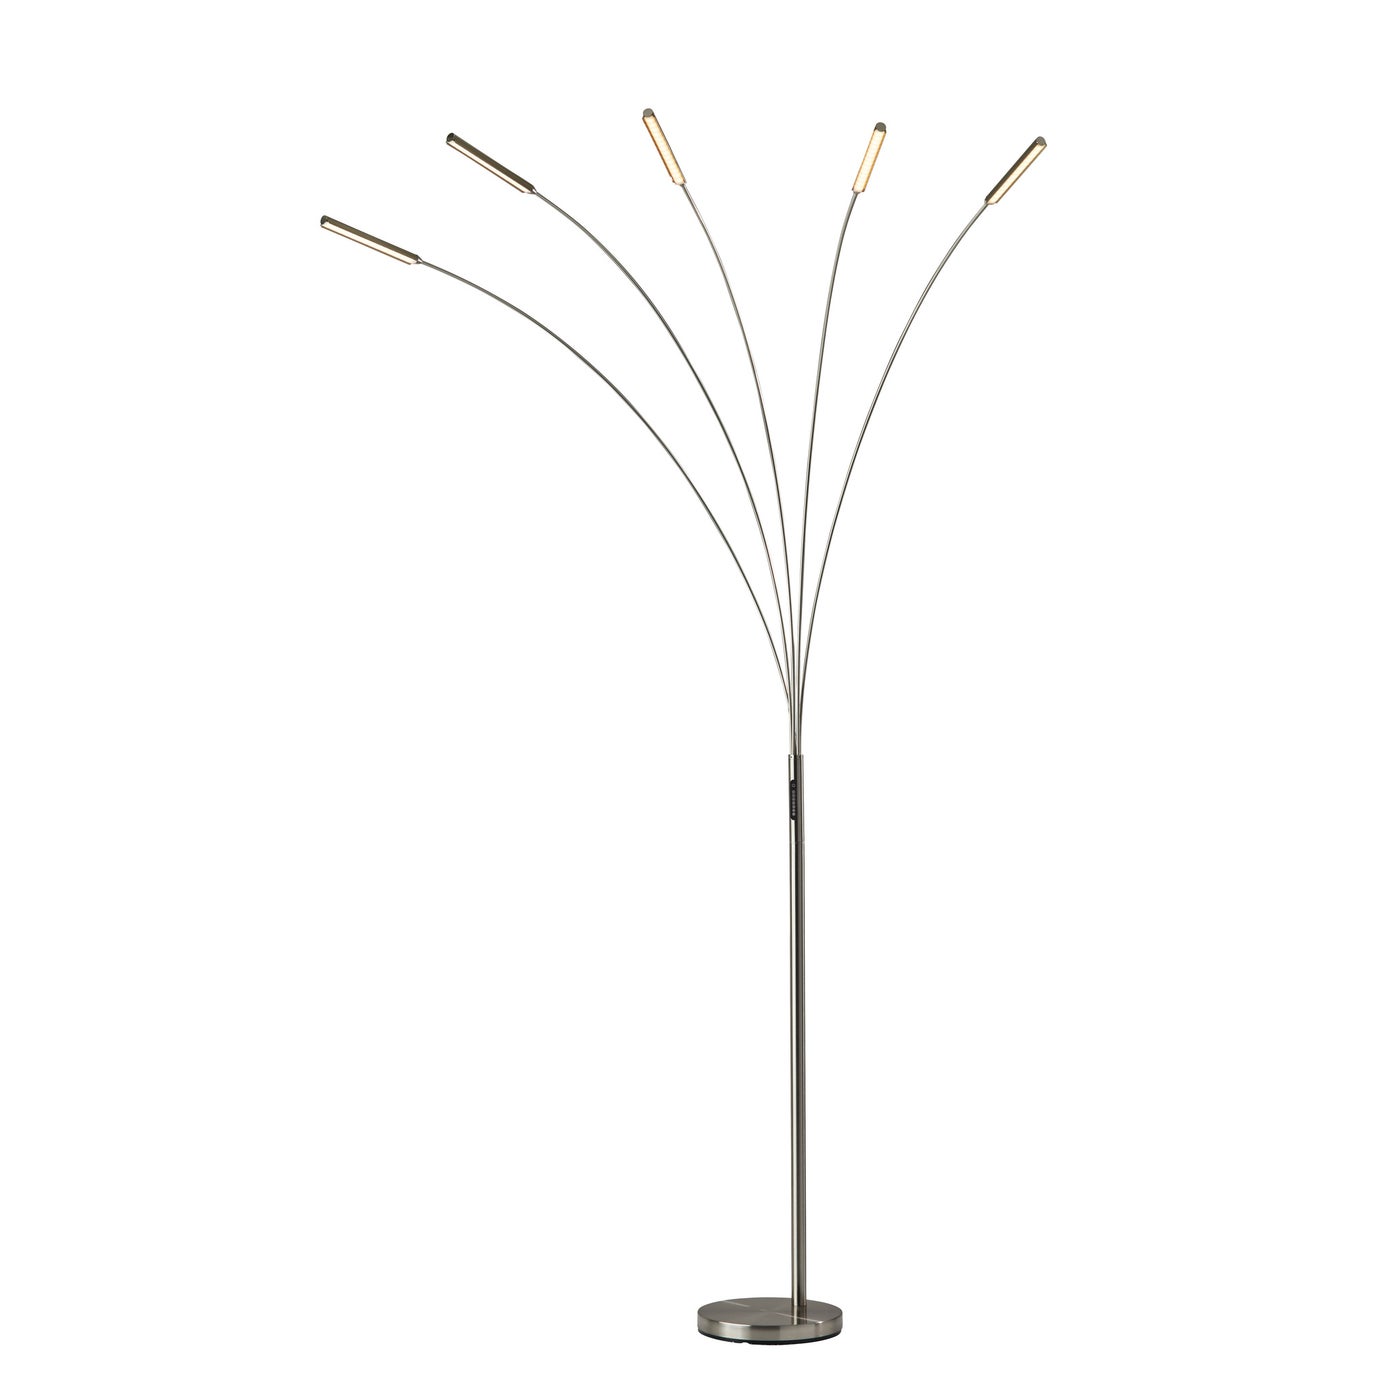 Adesso Home - 2131-22 - LED Arc Lamp - Zodiac - Brushed Steel